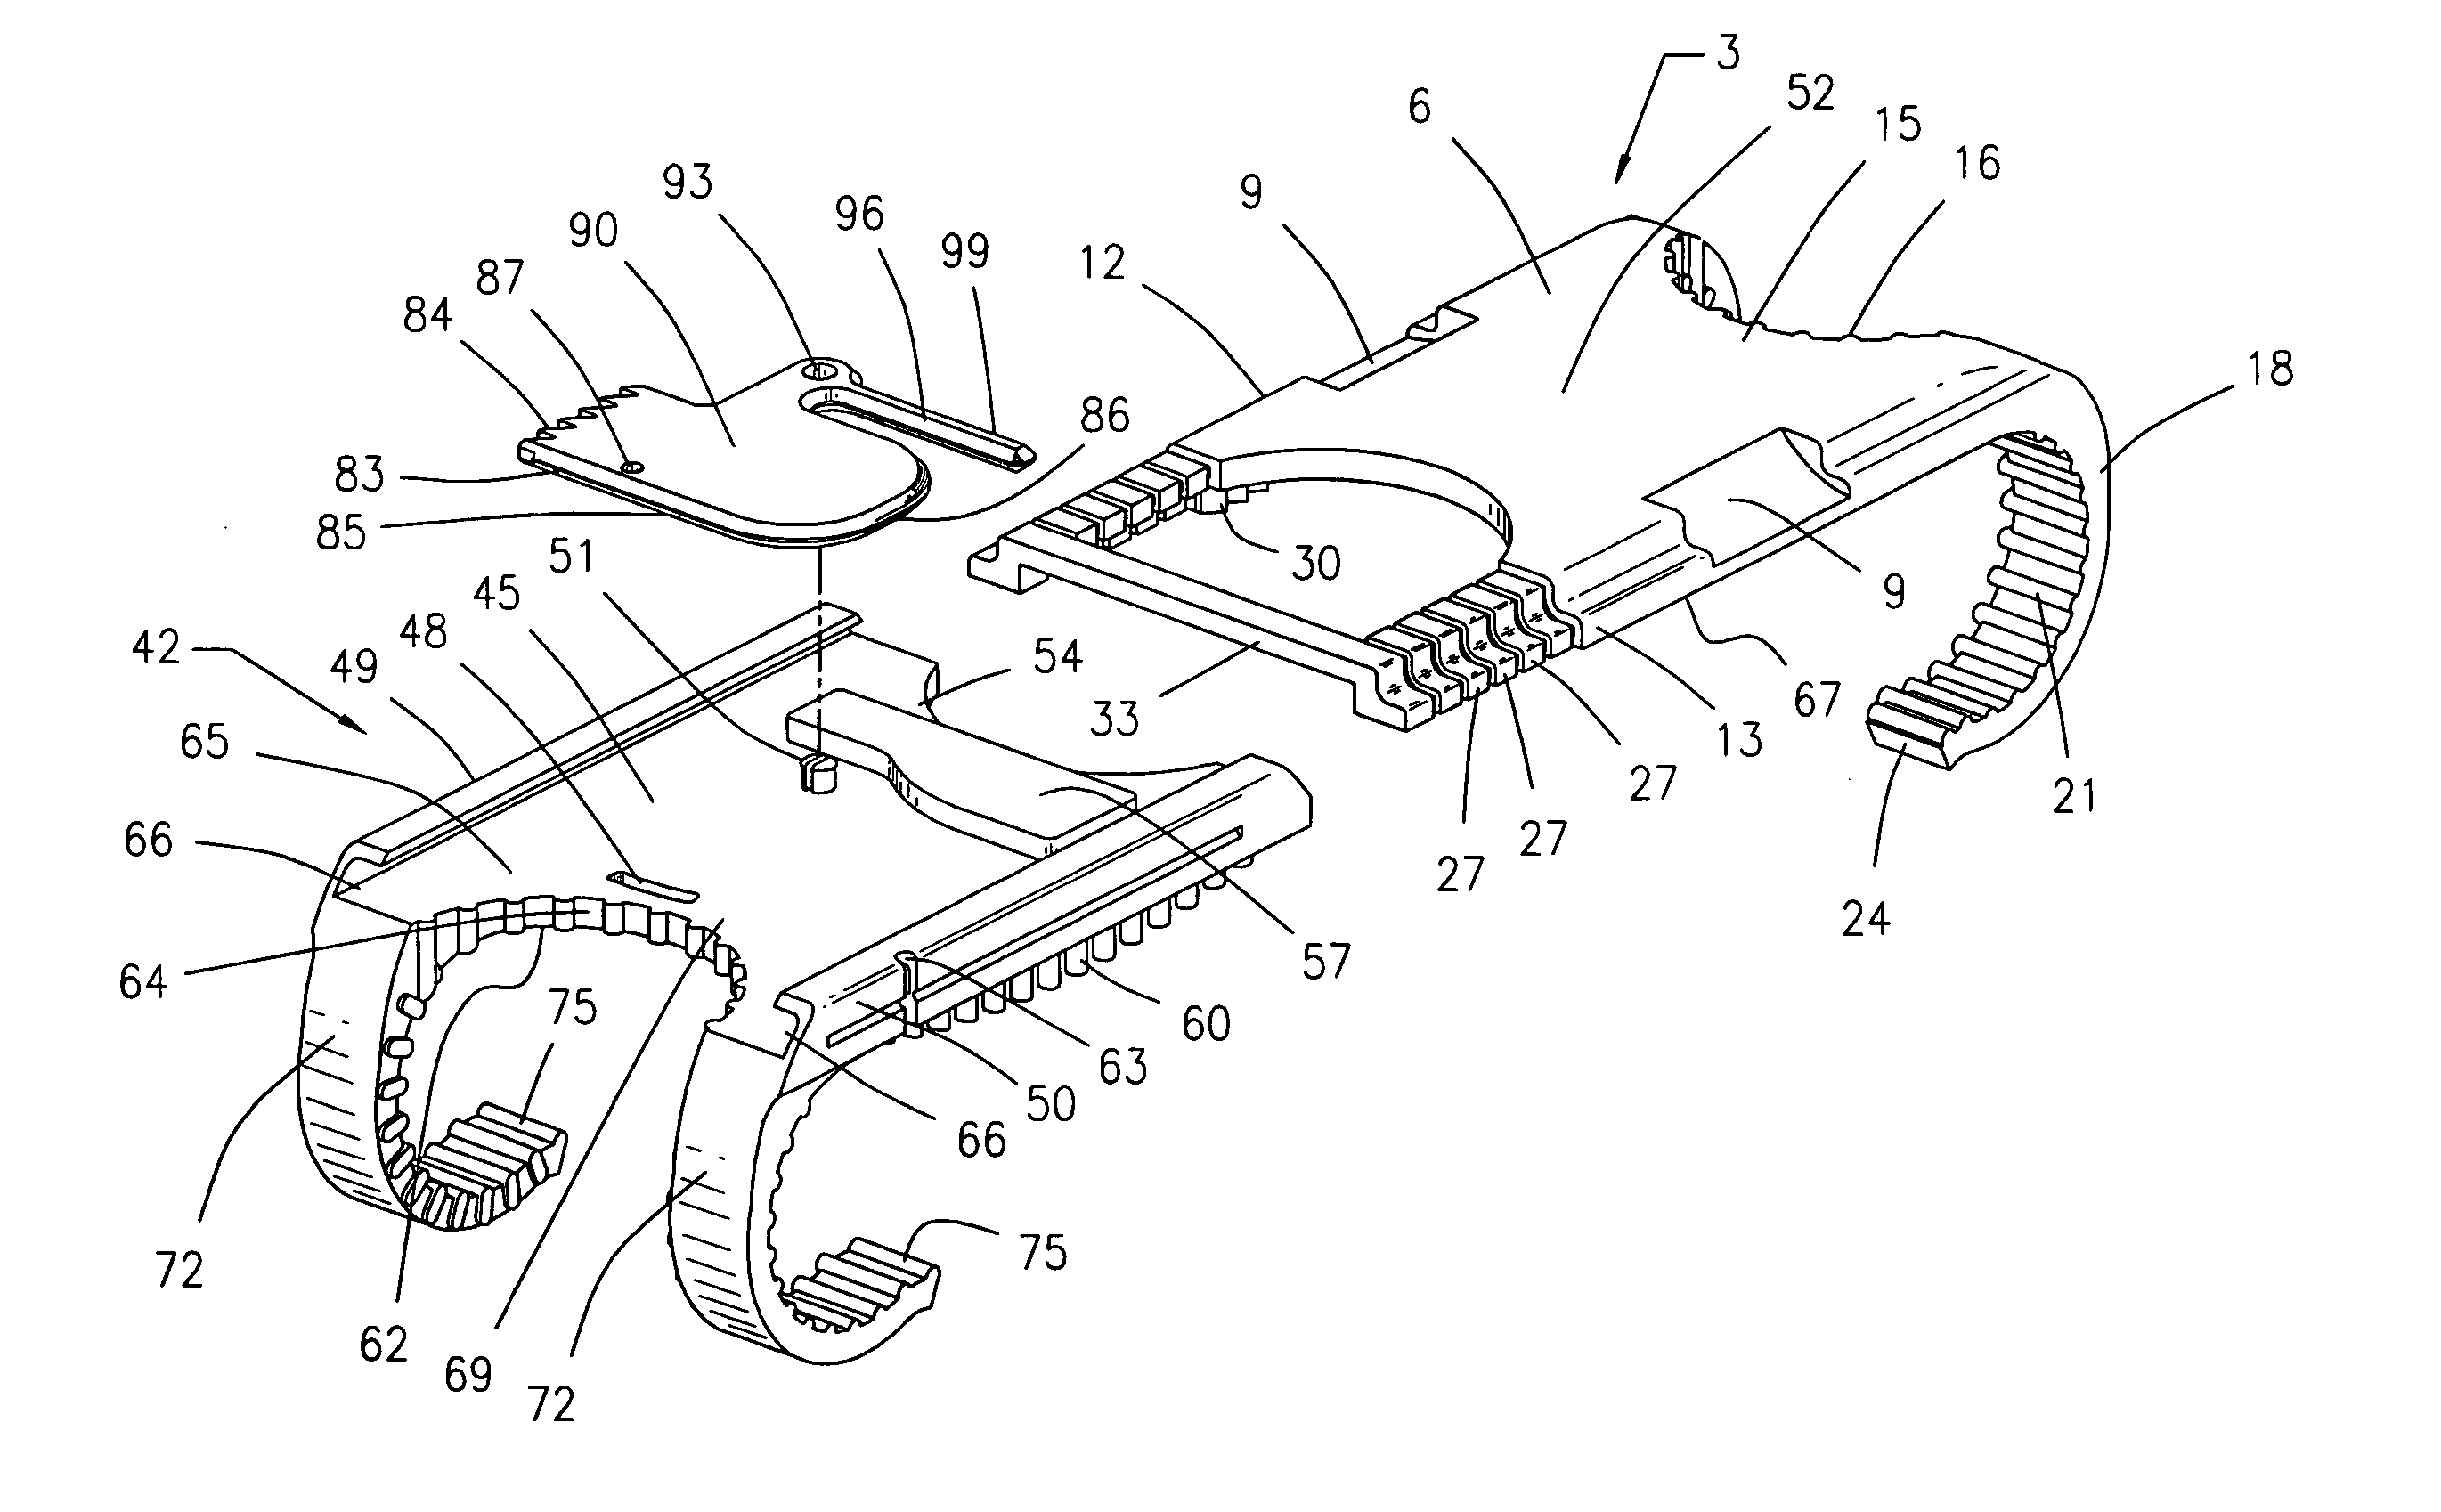 Surgical device for capturing, positioning and aligning portions of a severed human sternum